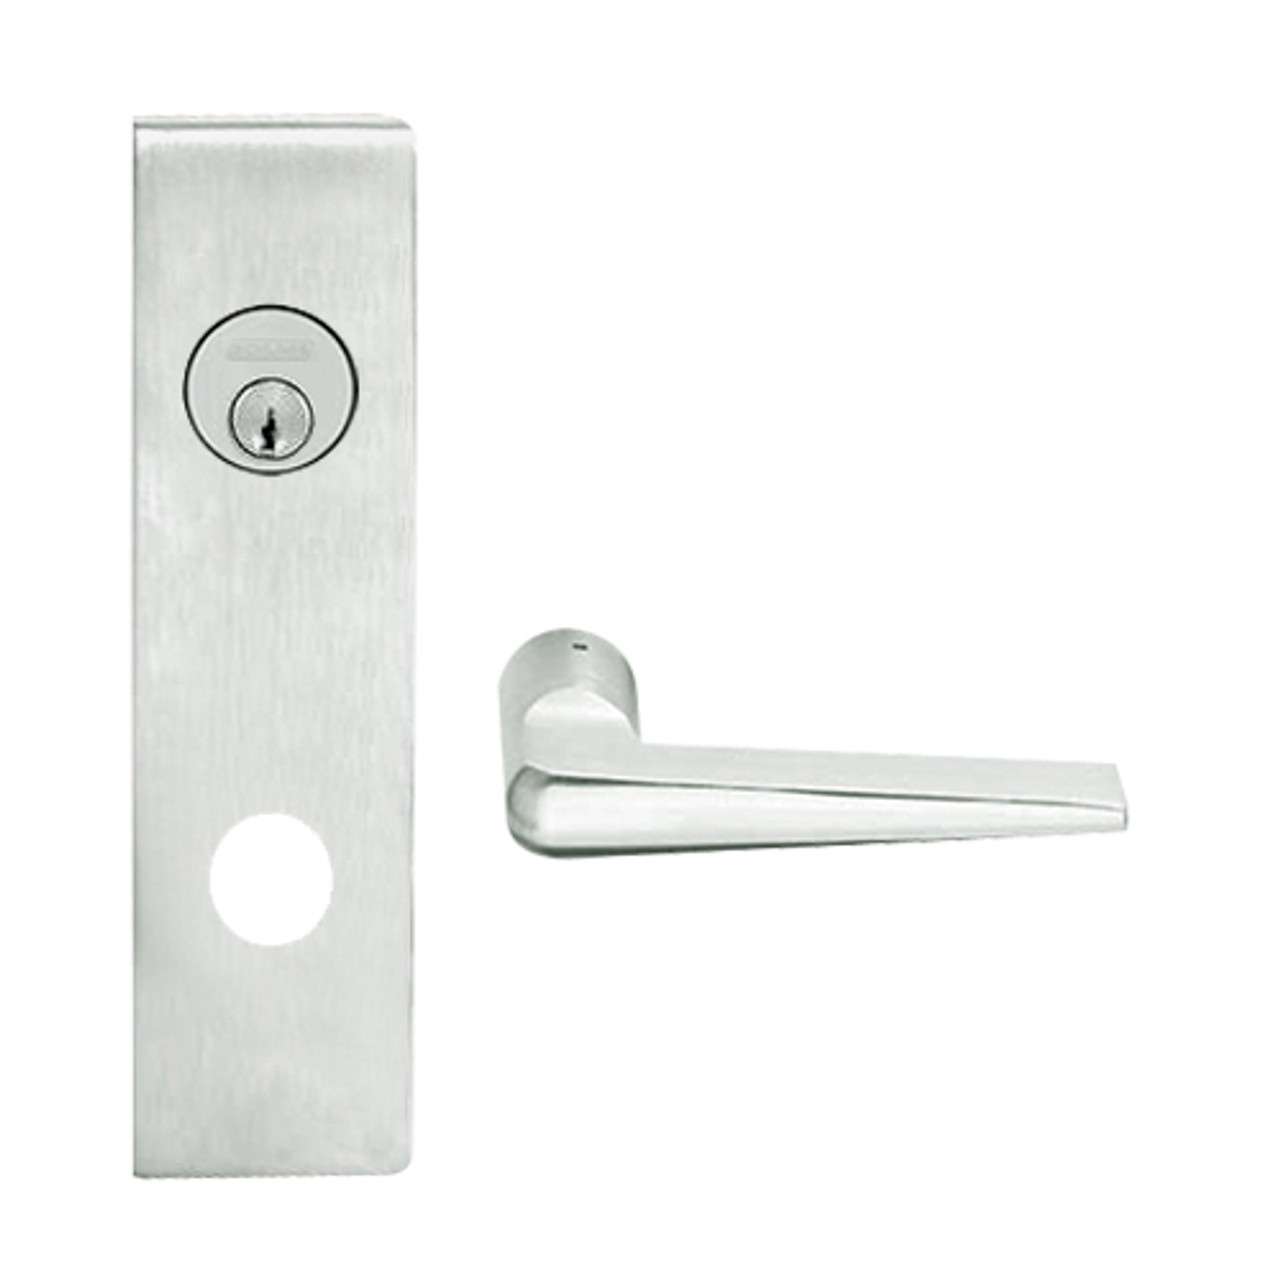 L9070L-05N-619 Schlage L Series Less Cylinder Classroom Commercial Mortise Lock with 05 Cast Lever Design in Satin Nickel